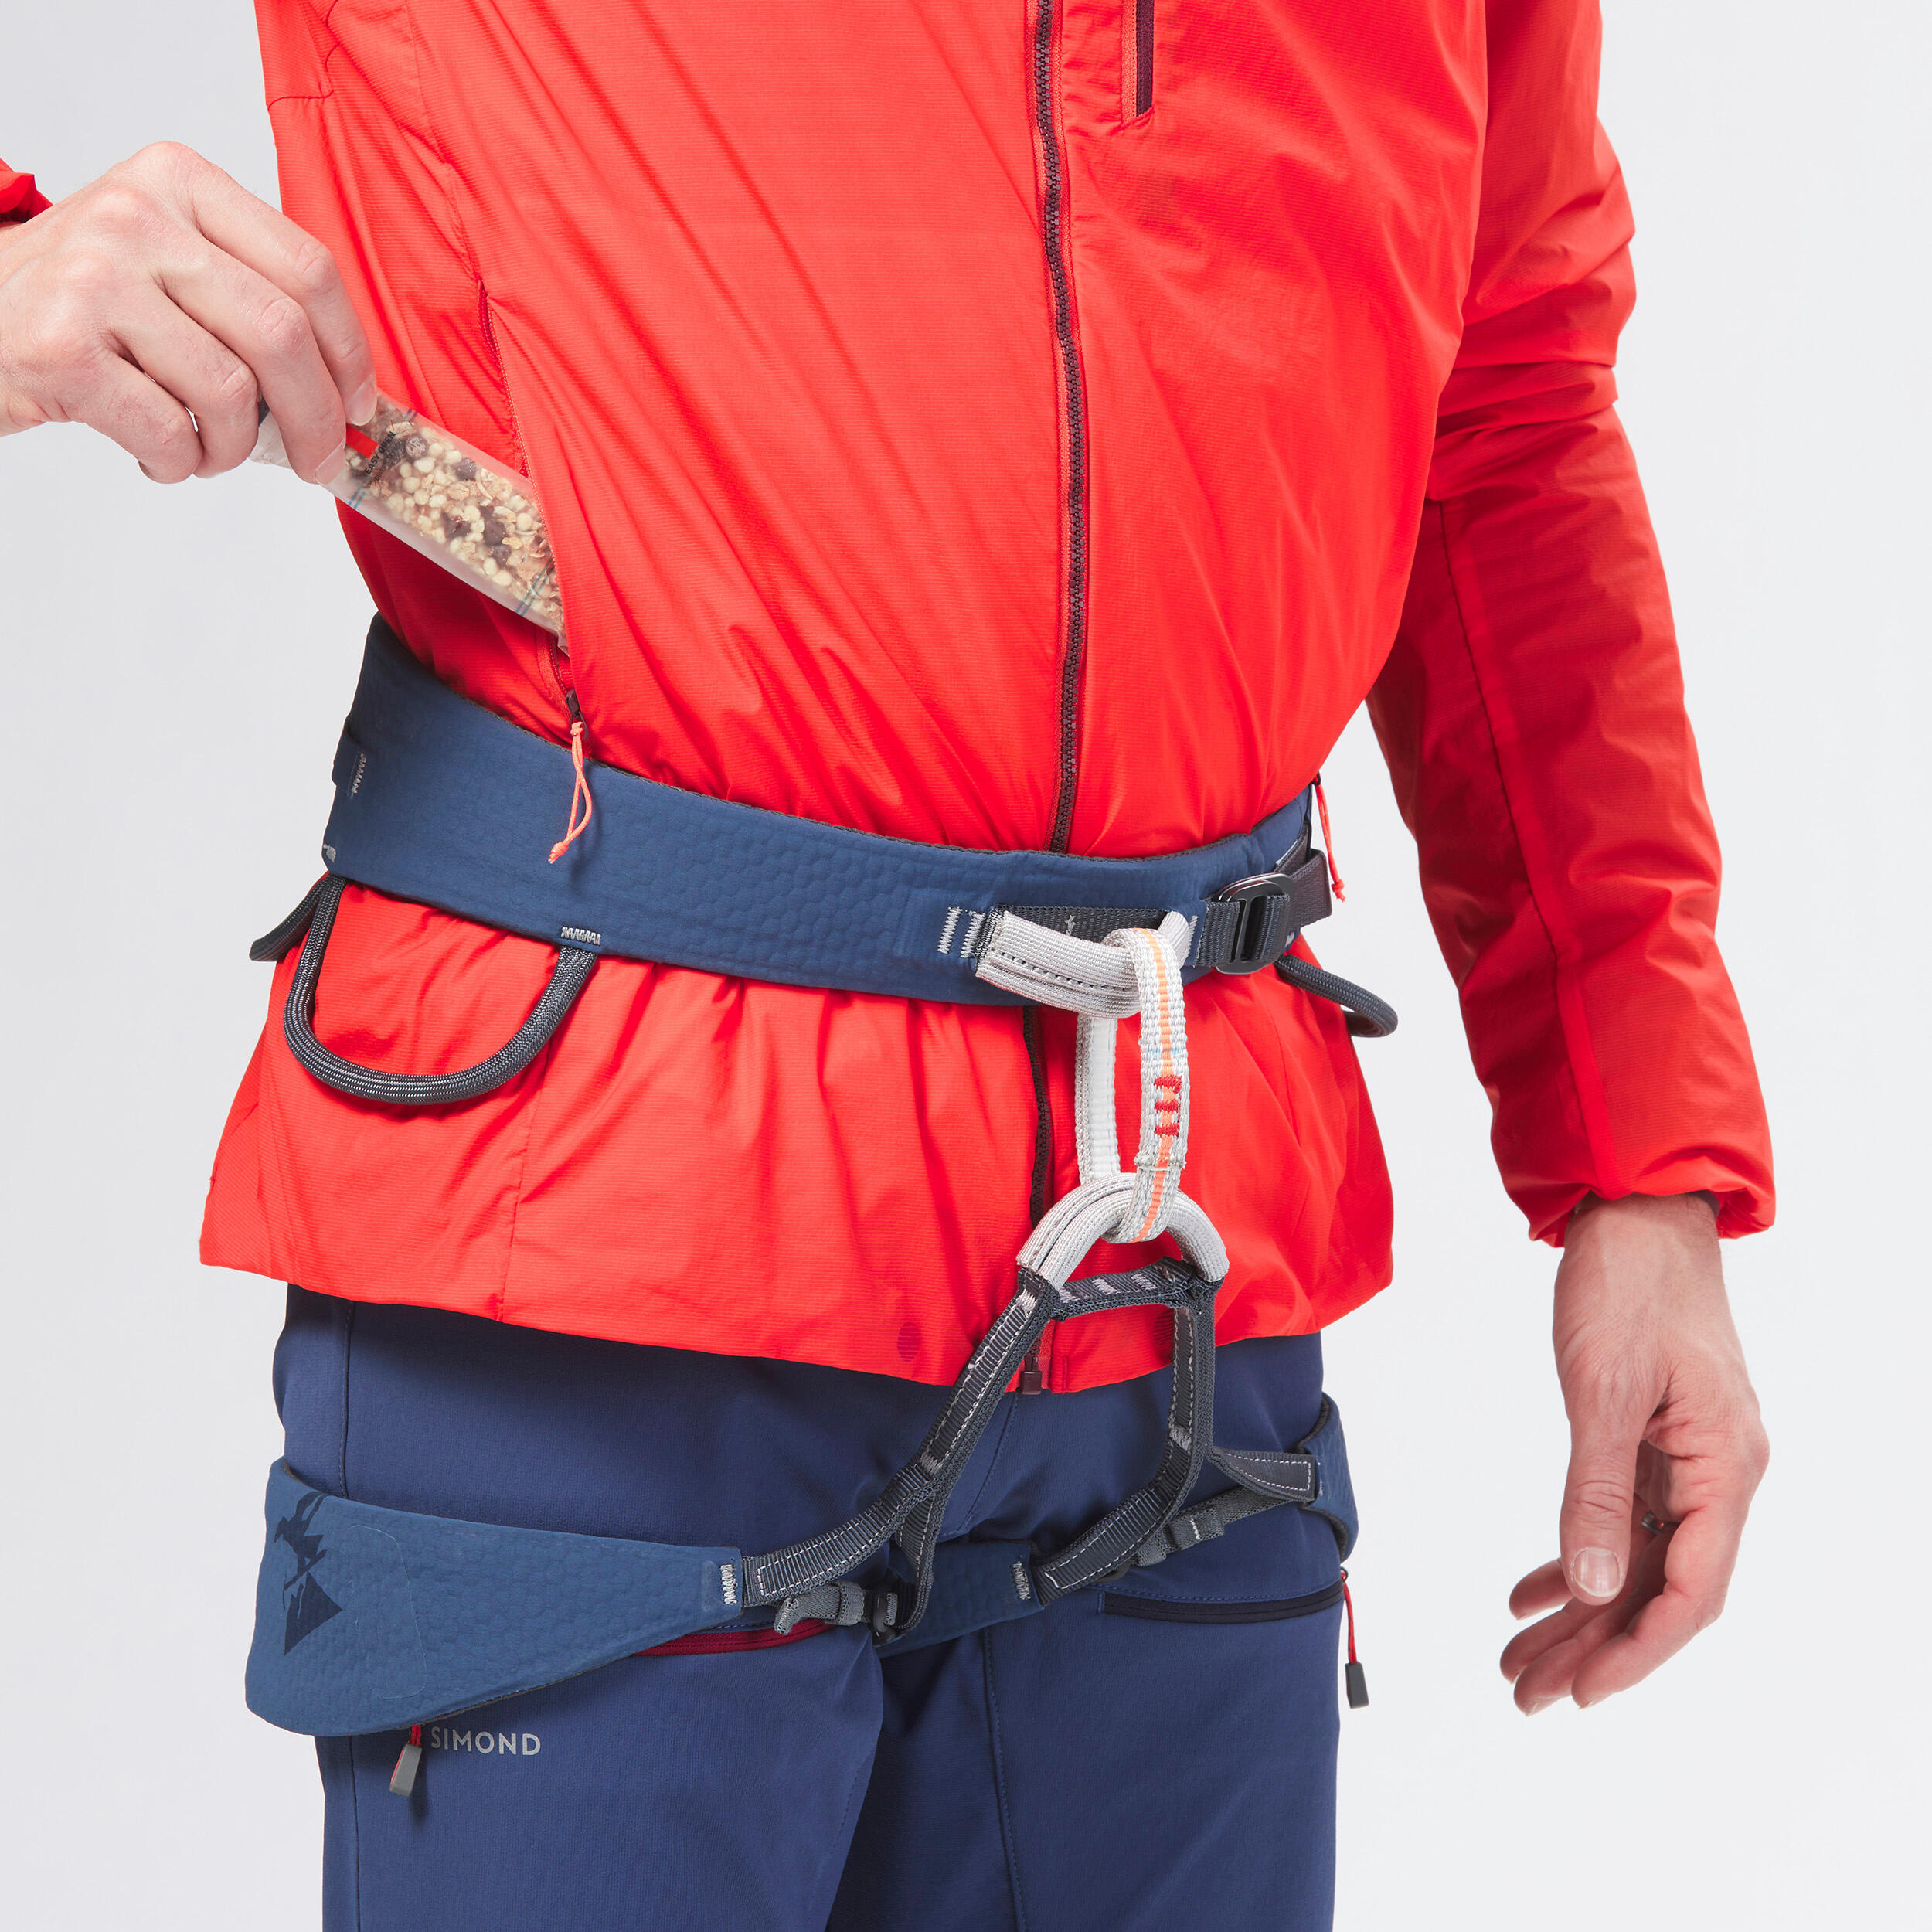 MEN'S WINDPROOF JACKET FOR MOUNTAINEERING - VERMILION RED 10/16